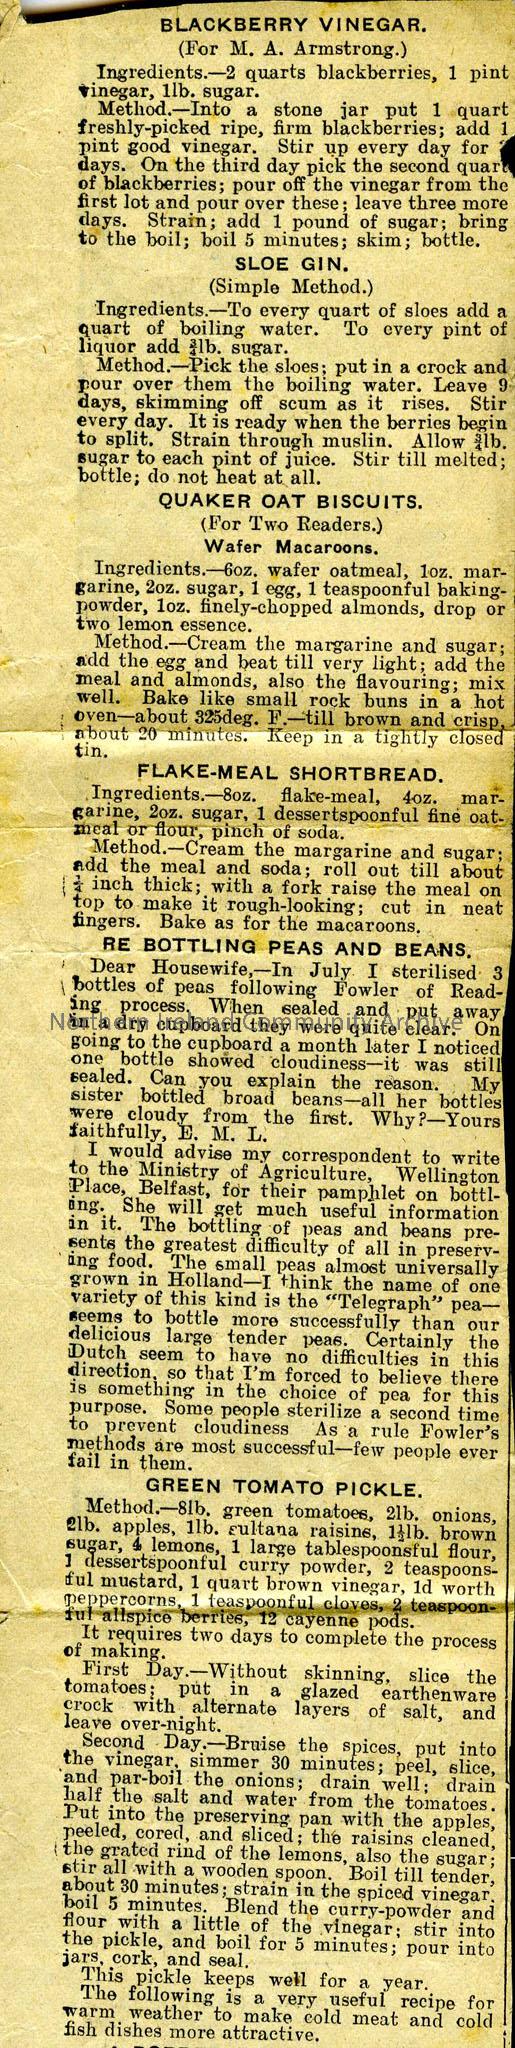 newspaper cutting with range of recipes – long thin article – scanned in 2 pieces